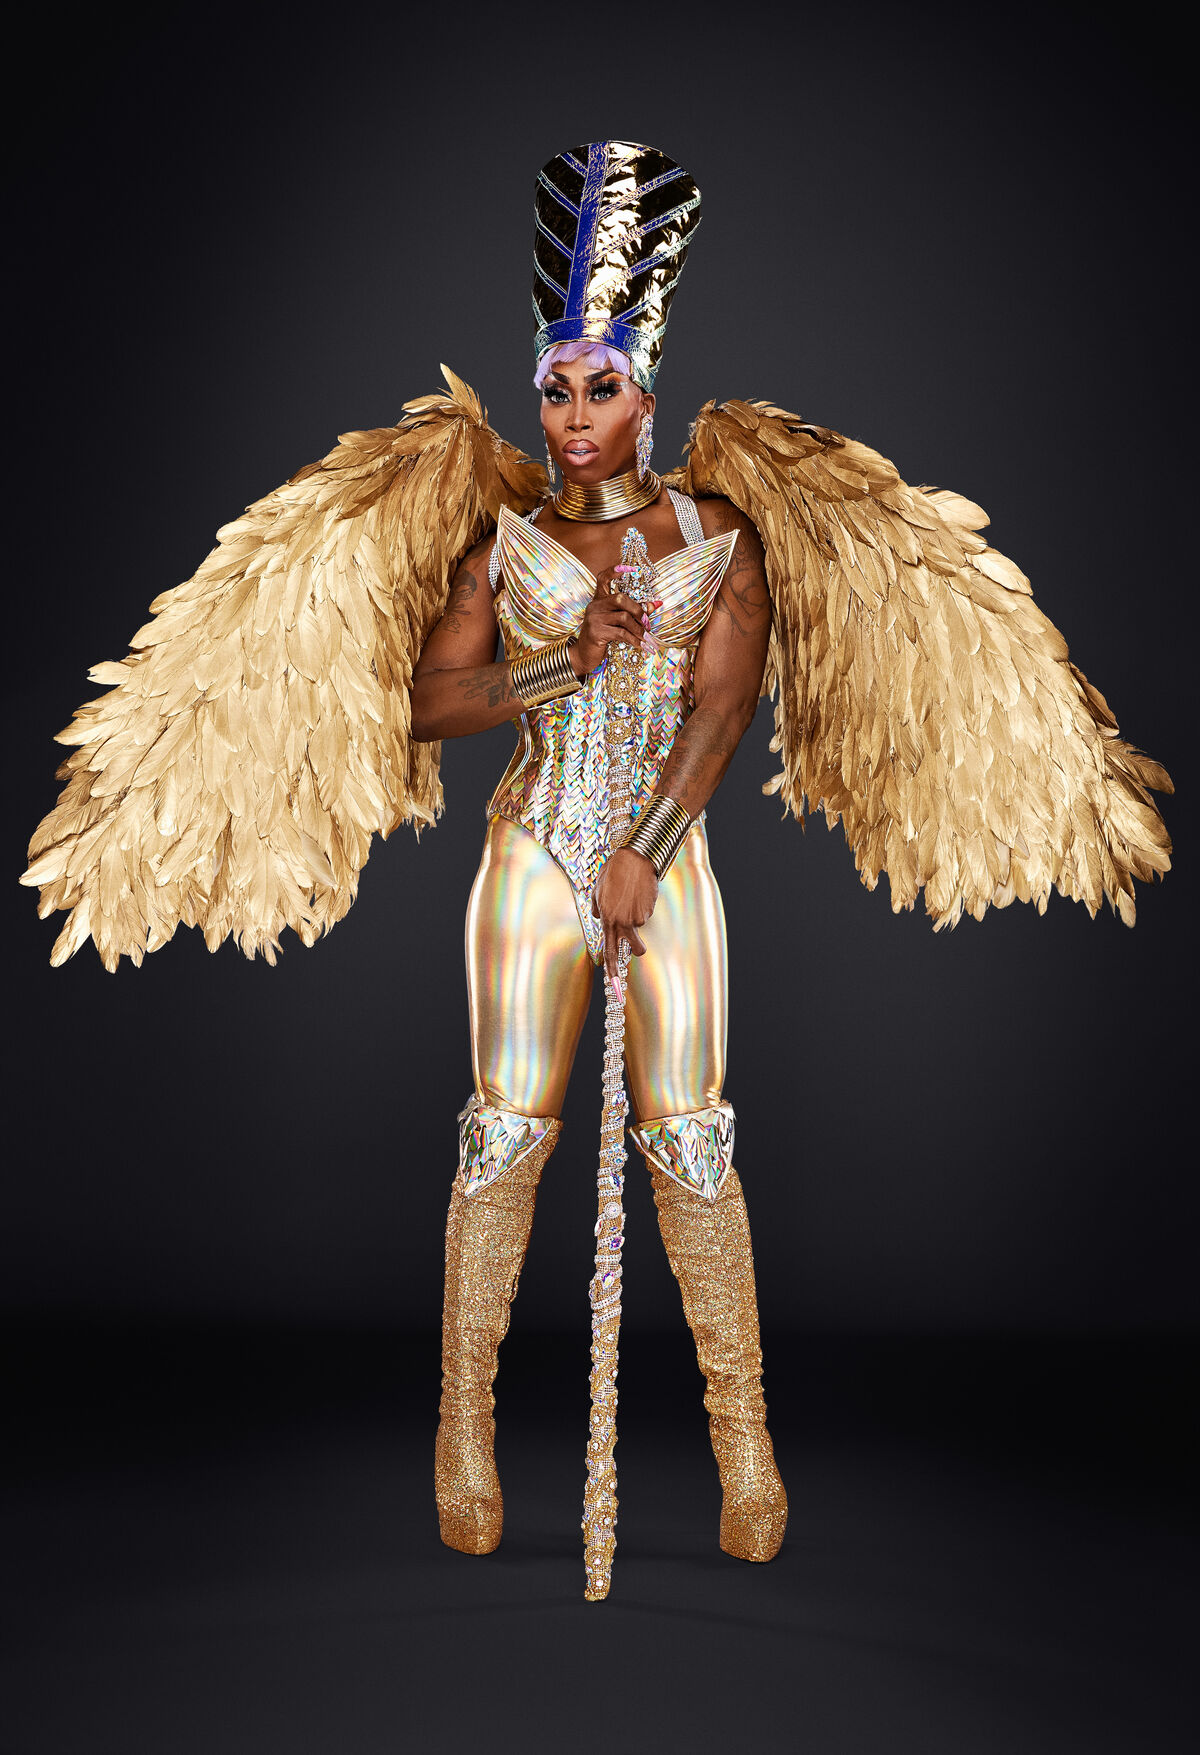 https://static.wikia.nocookie.net/logosrupaulsdragrace/images/a/ae/MoHeartUKvsTW.jpeg/revision/latest/scale-to-width-down/1200?cb=20220202224026